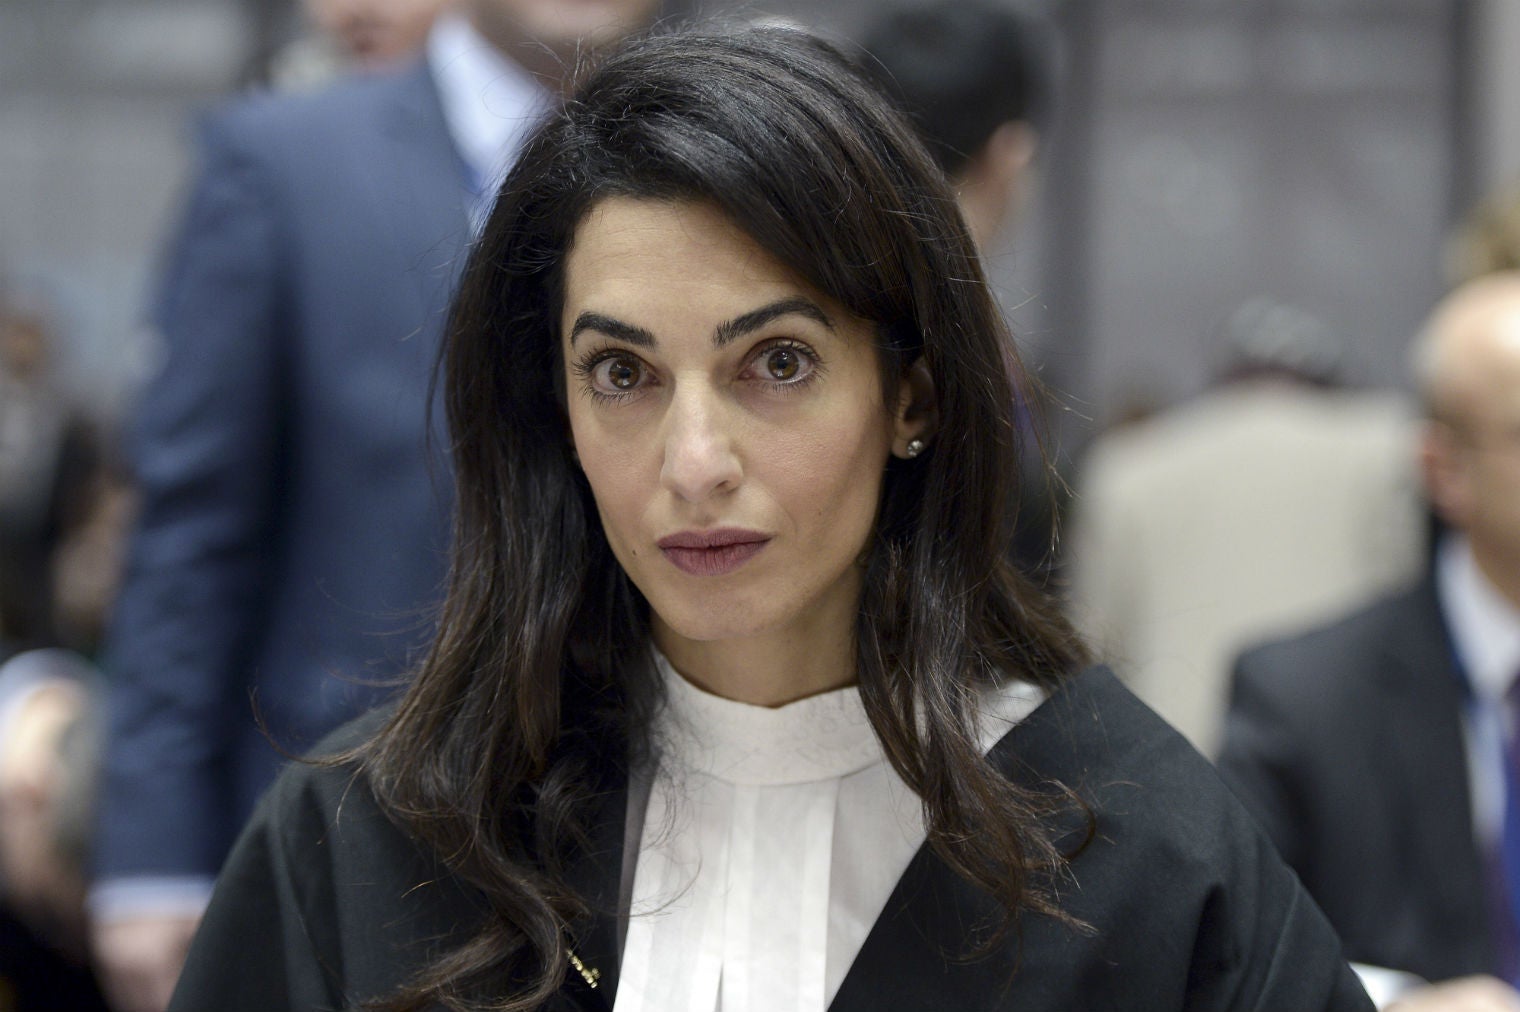 Human Rights lawyer Amal Clooney